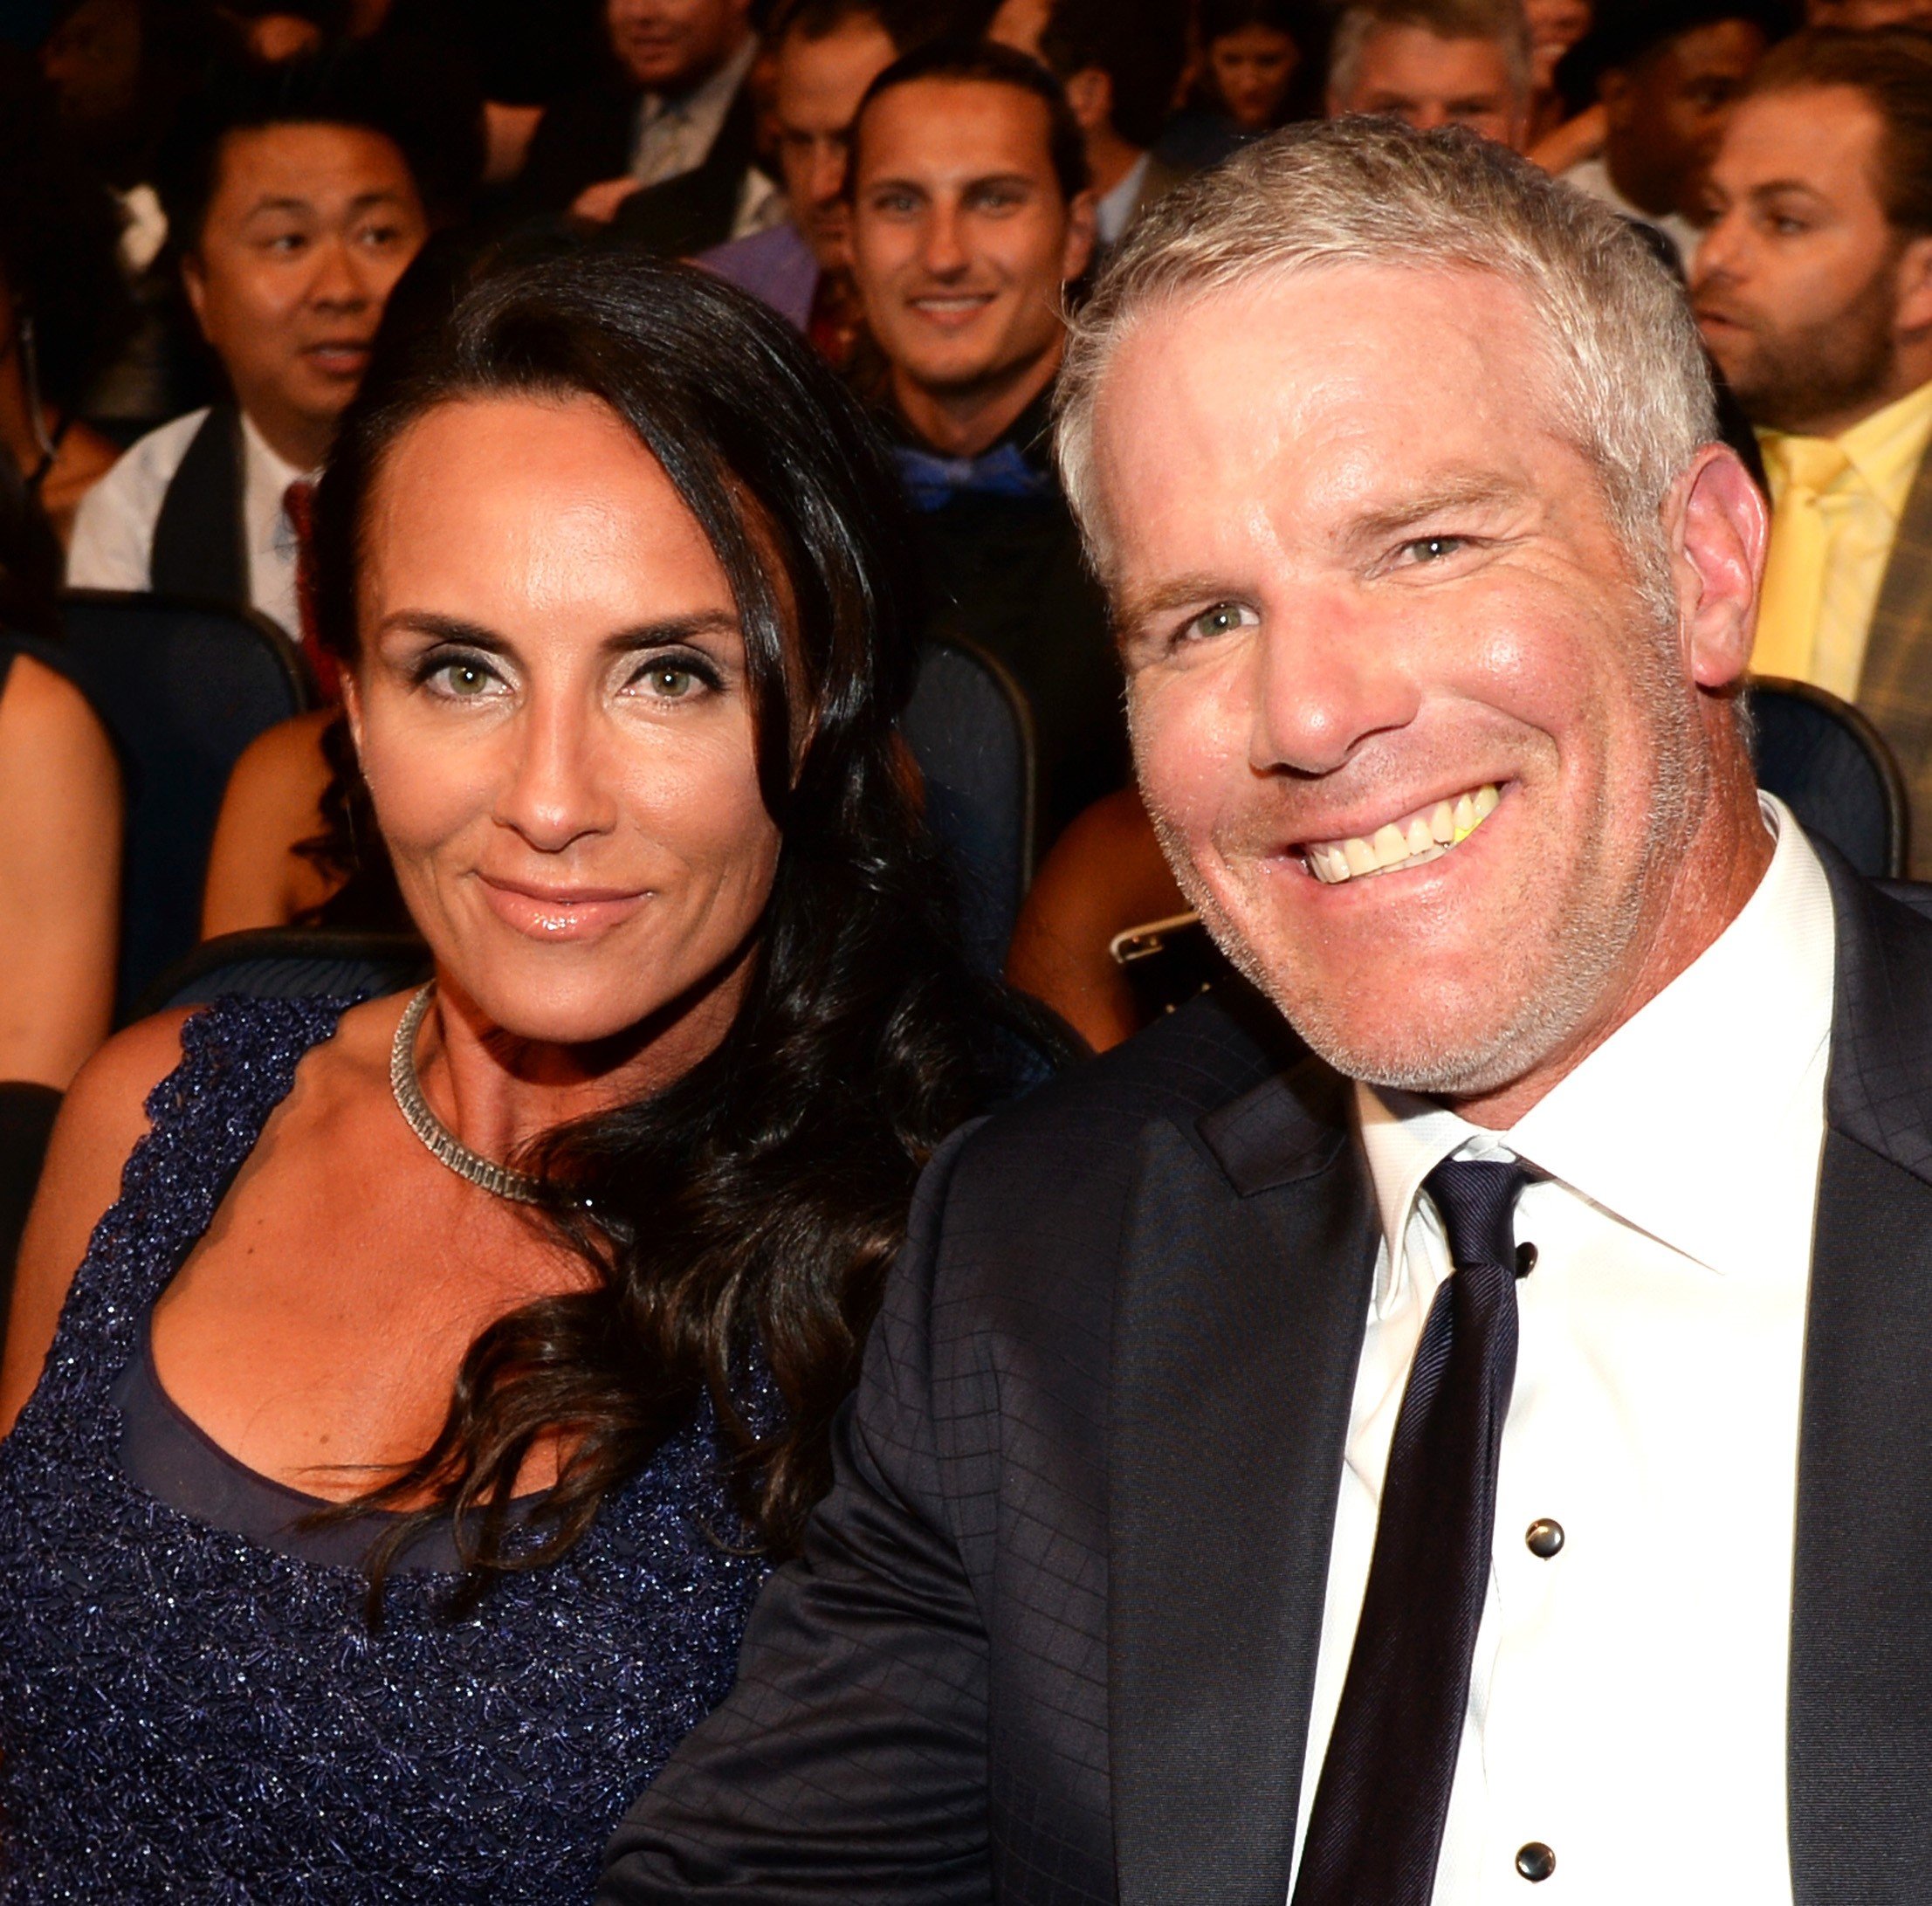 Brett Favre with wife DeAnna Favre at the 2015 ESPYs in Los Angeles, California | Source: Getty Images